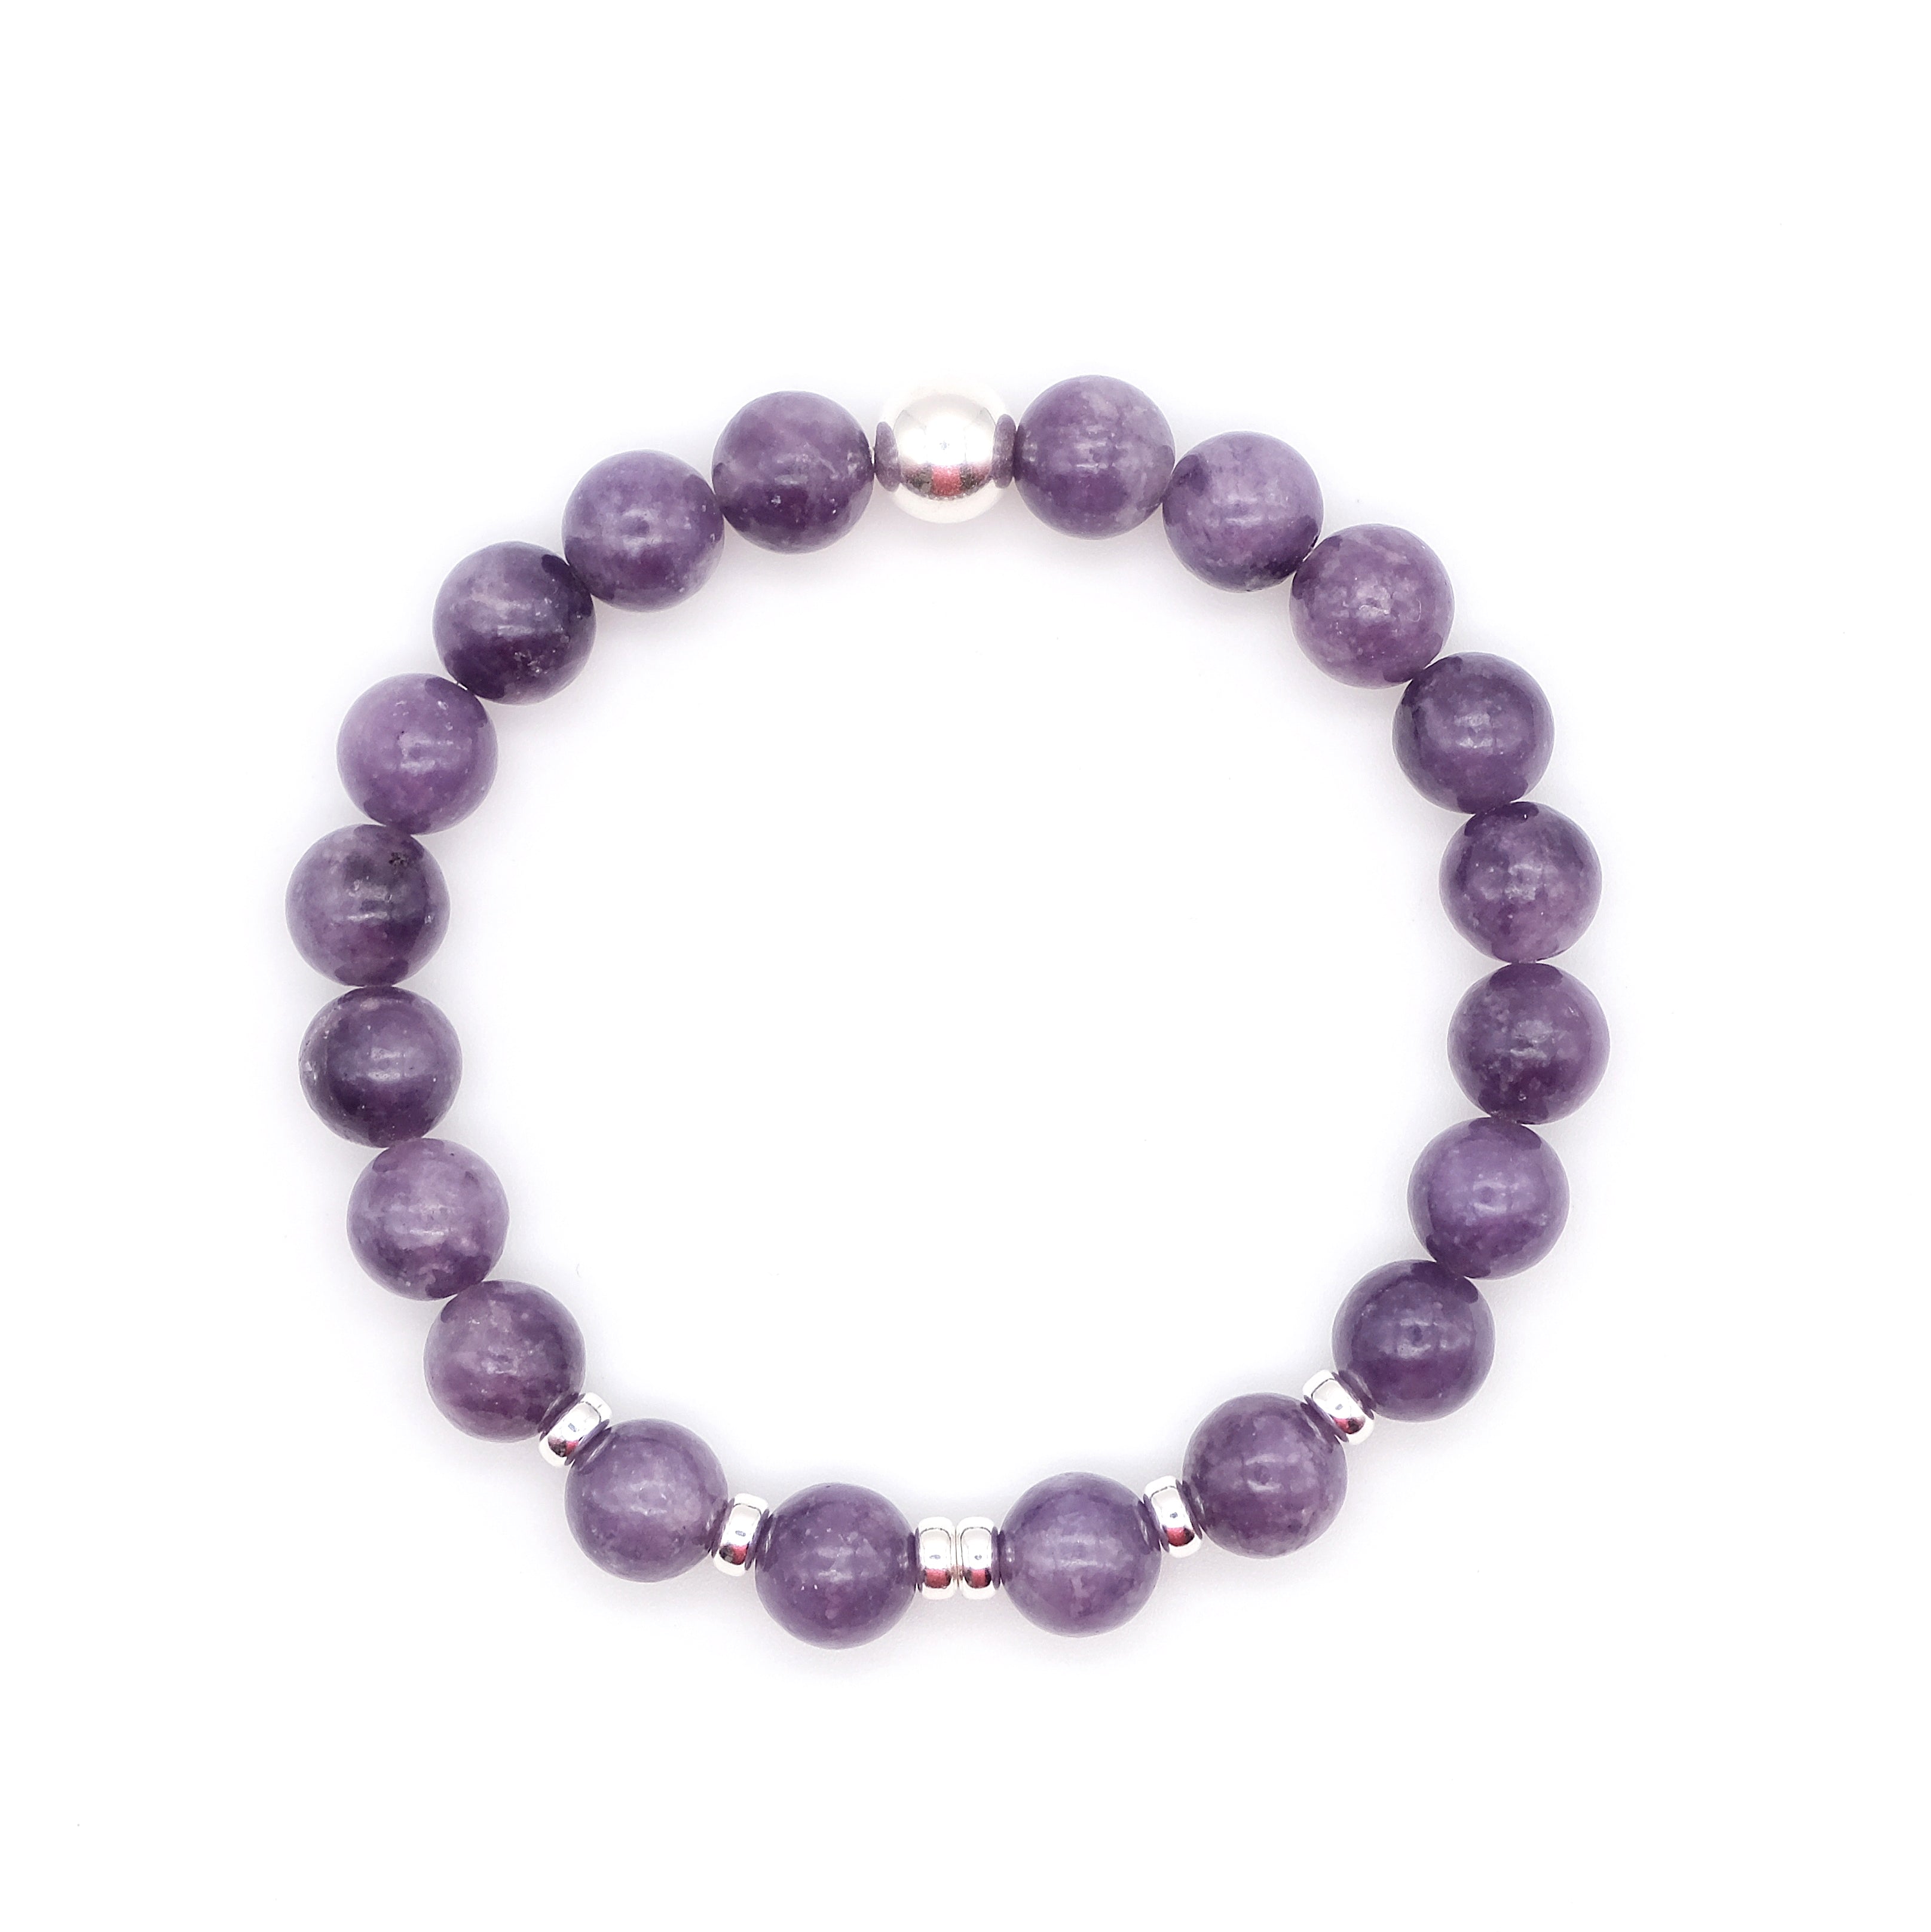 A lepidolite gemstone bracelet with silver accessories from above